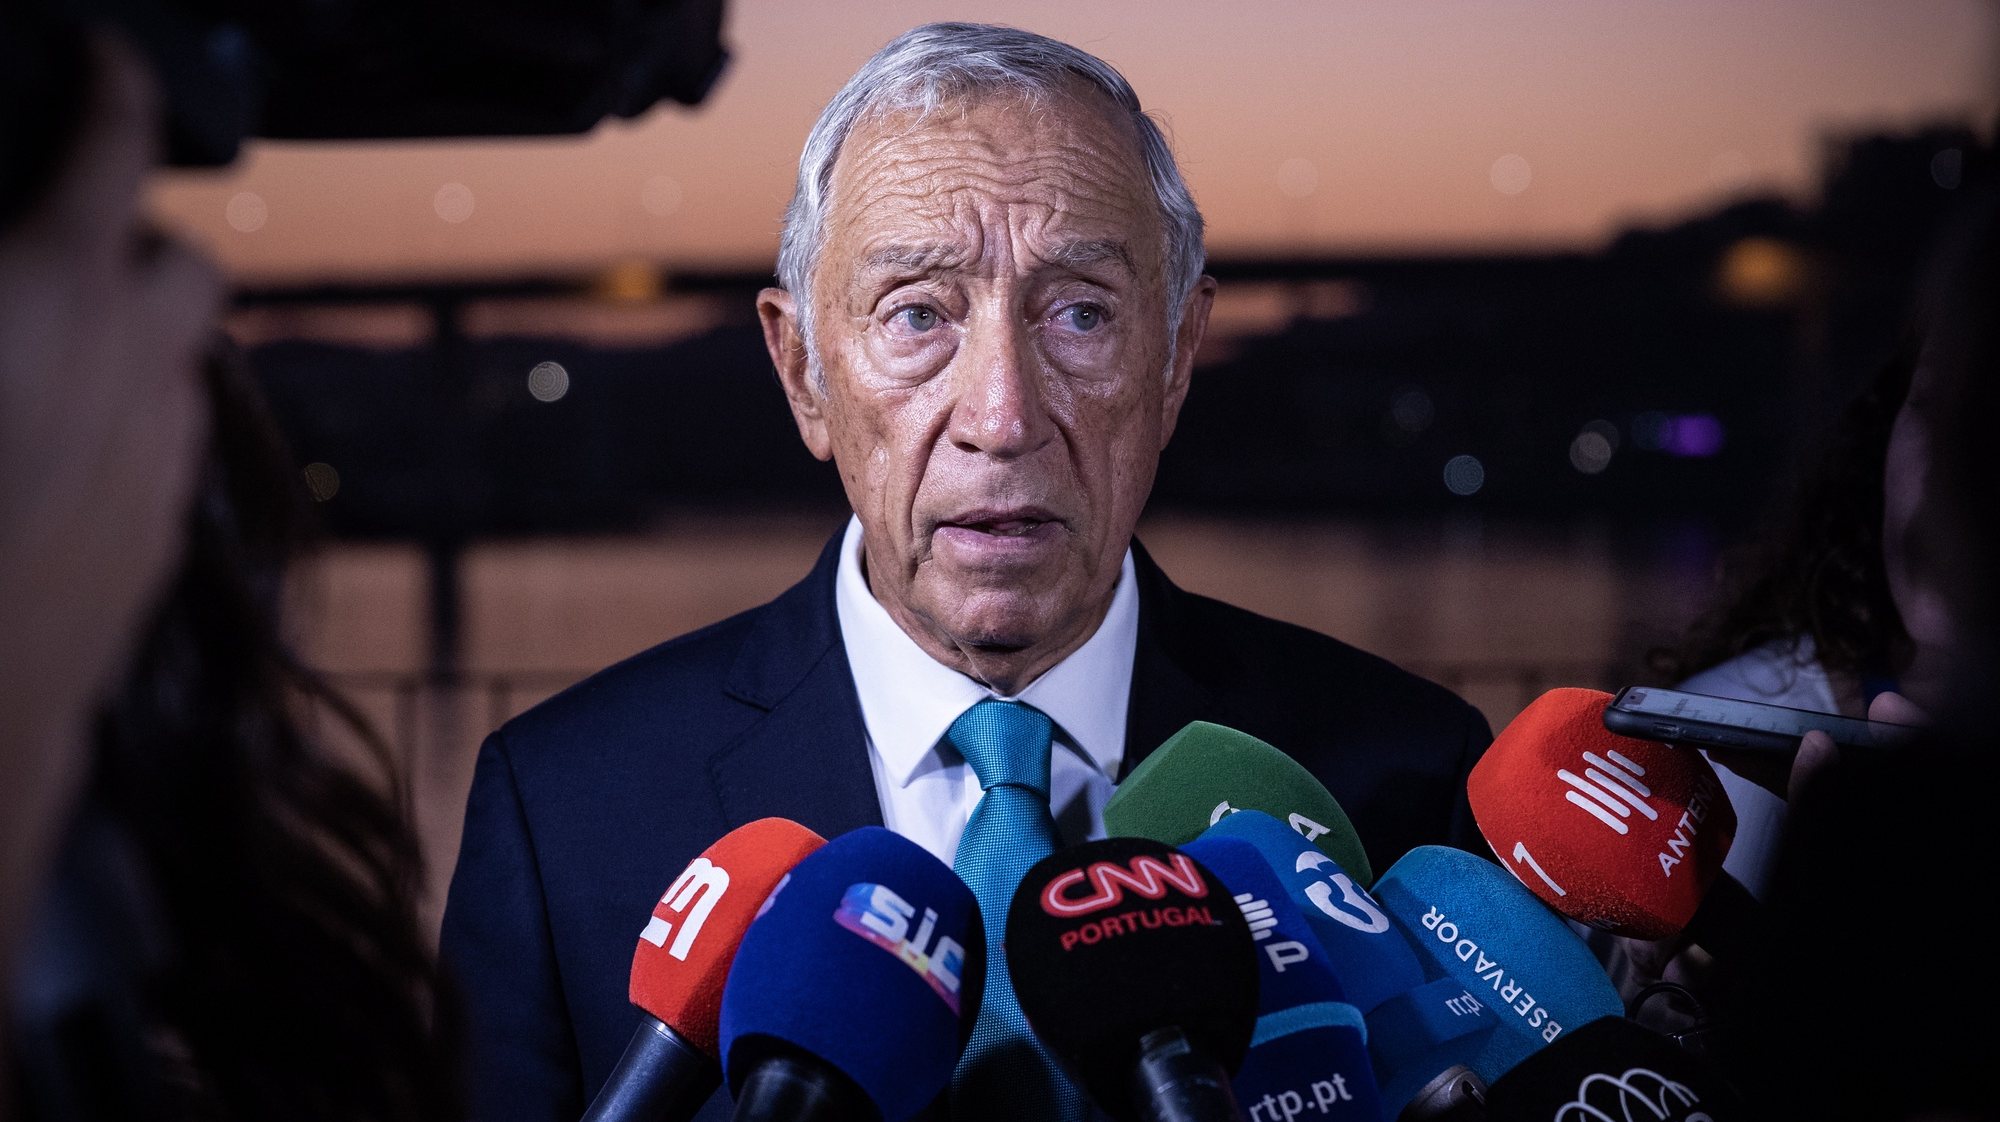 epa10904186 Portuguese President Marcelo Rebelo de Sousa speaks to media during the 18th Informal Meeting of the Non-Executive Heads of State of the European Union, known as the &#039;Arraiolos Group&#039;, in Porto, Portugal, 06 October 2023. The Arraiolos Group was established in 2003 in Arraiolos, Portugal. This meeting was attended by presidents from 13 countries, including Bulgaria, Italy, Estonia, Ireland, Greece, Croatia, Latvia, Hungary, Poland, Portugal, Finland, Malta, and Slovenia.  EPA/JOSE COELHO